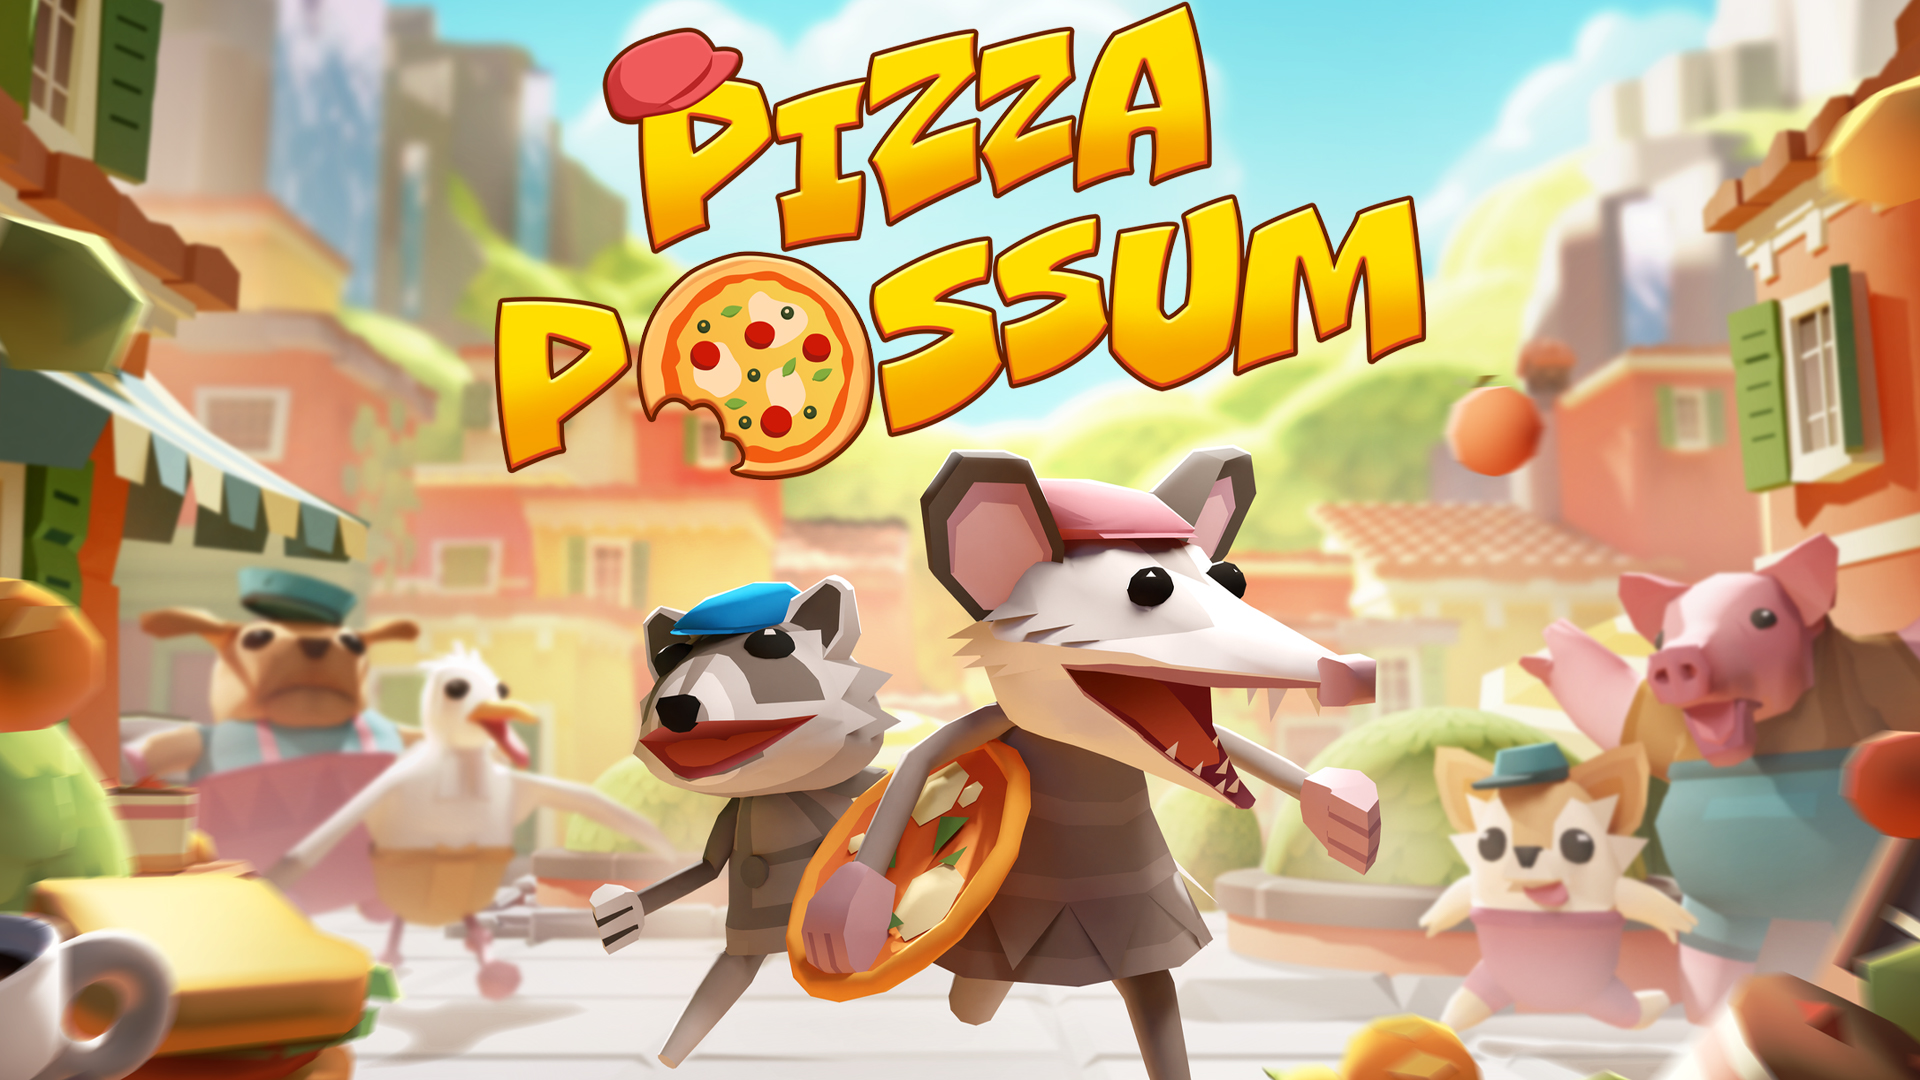 Mayhem simulator Pizza Possum is now available on PC and consoles